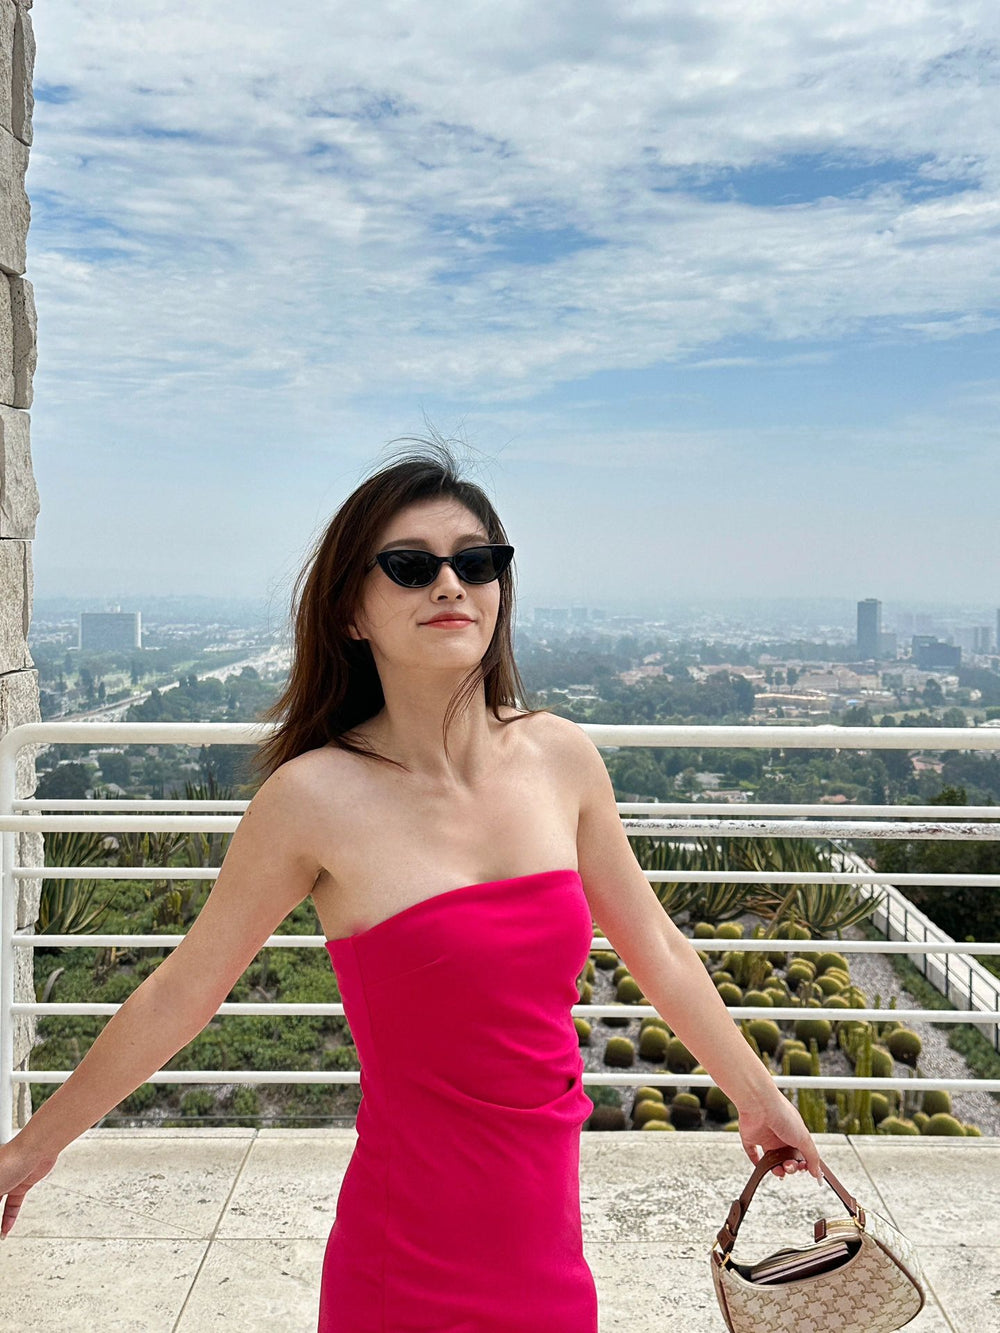 Feast your eyes on the picture of sophistication - a woman in a pink dress and sunglasses, standing on a balcony, exuding grace and charm with her Korean  fashionable sunglasses.